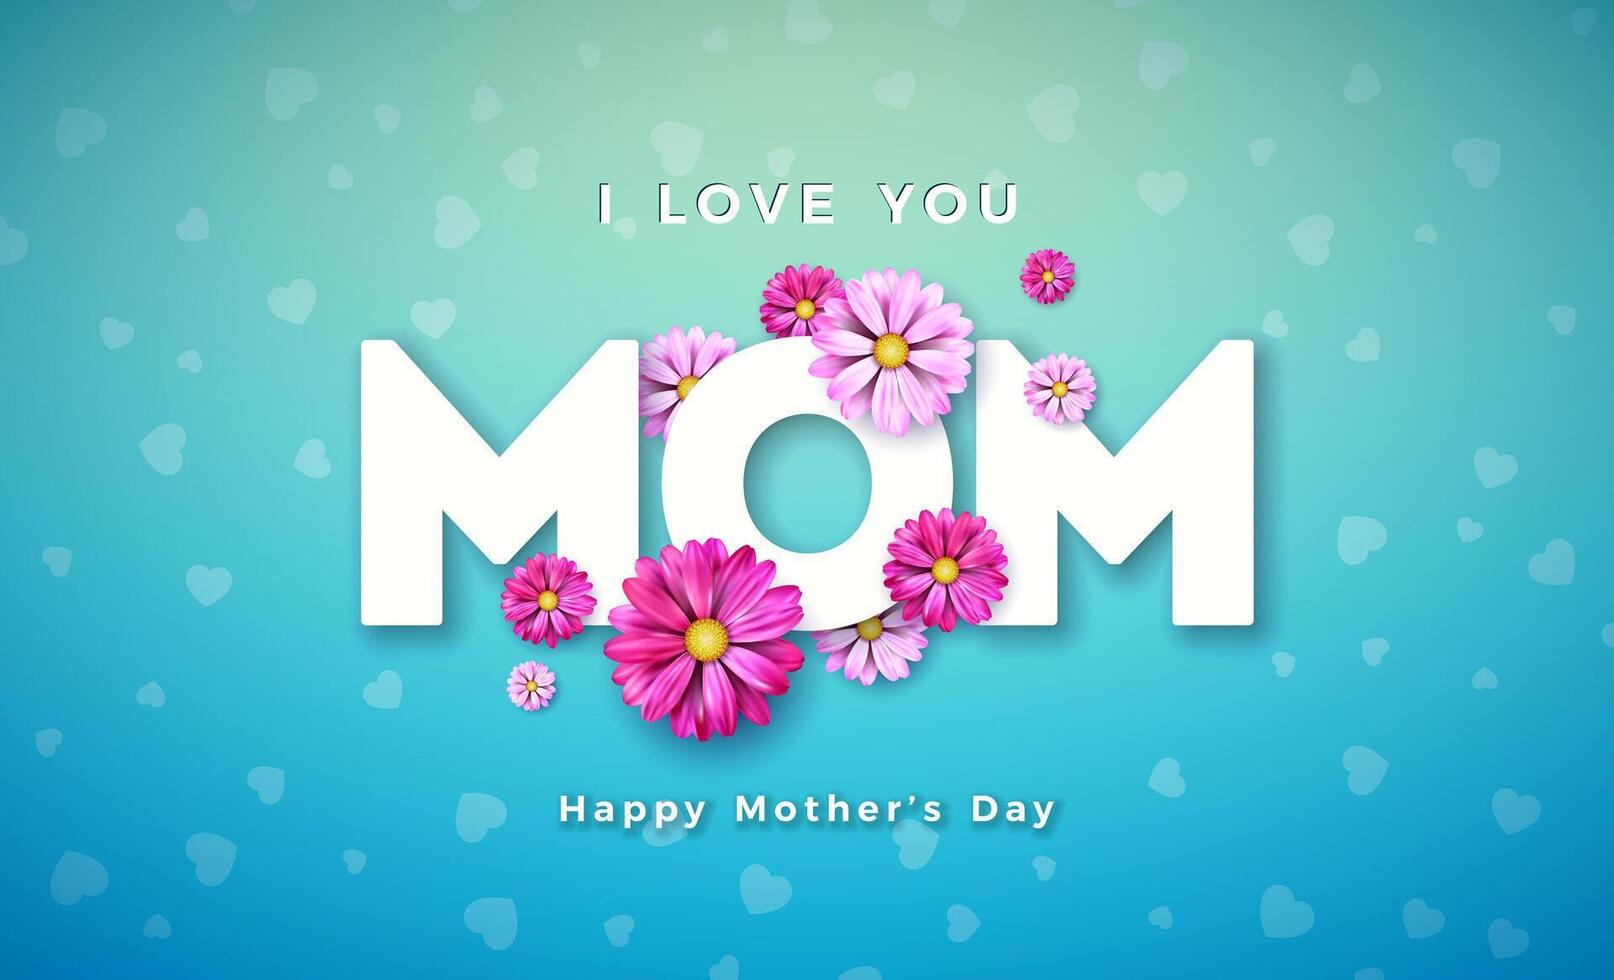 Happy Mother's Day Greeting Card Design with Flower and Typography Letter on Blue Background. Vector Celebration Illustration Template for Banner, Flyer, Invitation, Brochure, Poster.